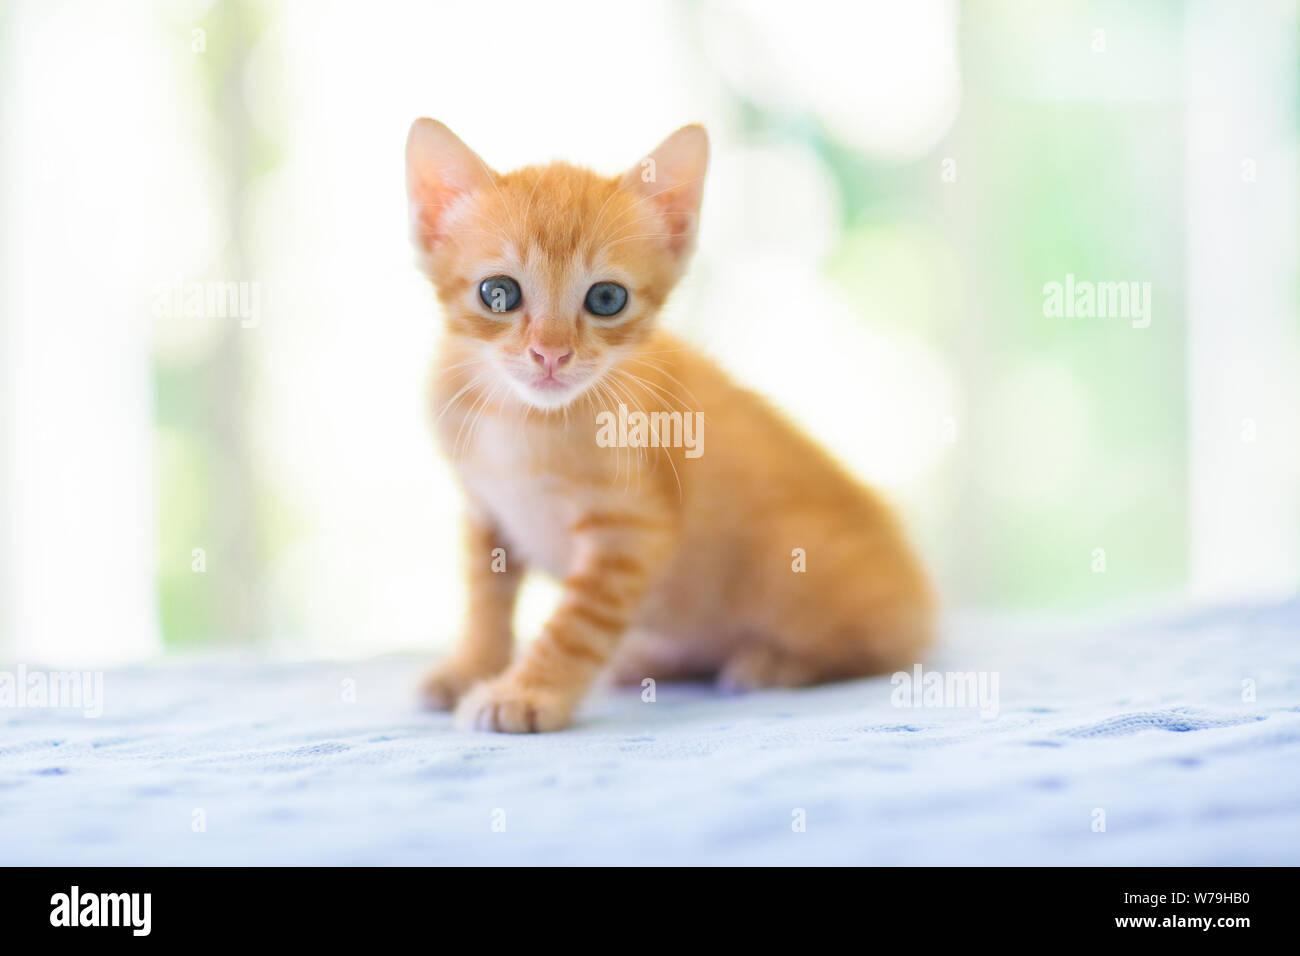 Baby cat. Ginger kitten playing on couch with knitted blanket. Domestic animal. Home pet. Young cats. Cute funny cats play at home. Stock Photo